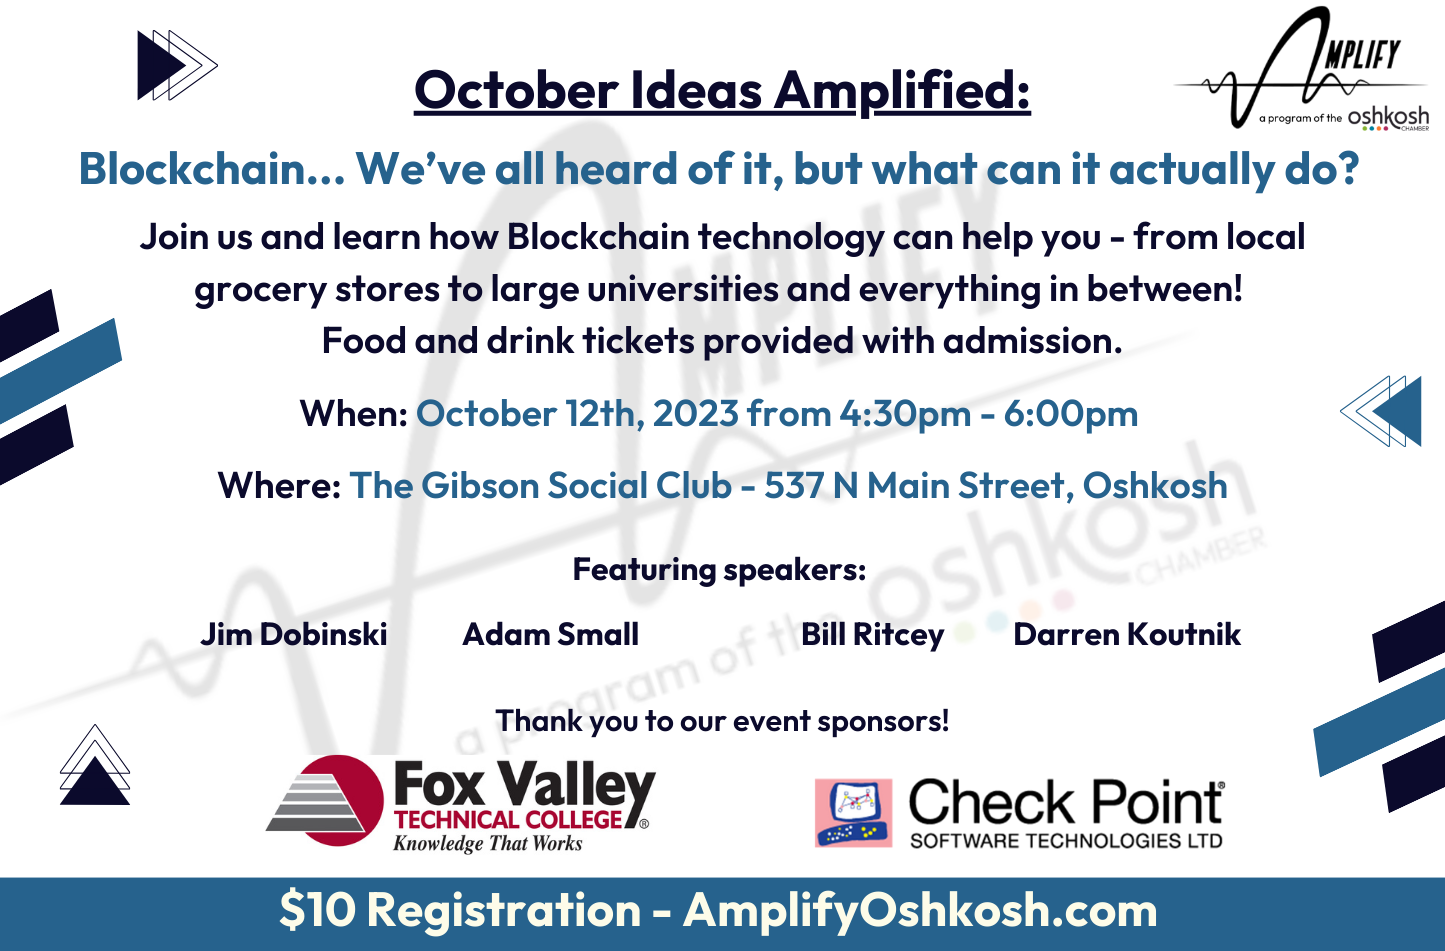 October Ideas Amplified – “Blockchain… What can it actually do?”